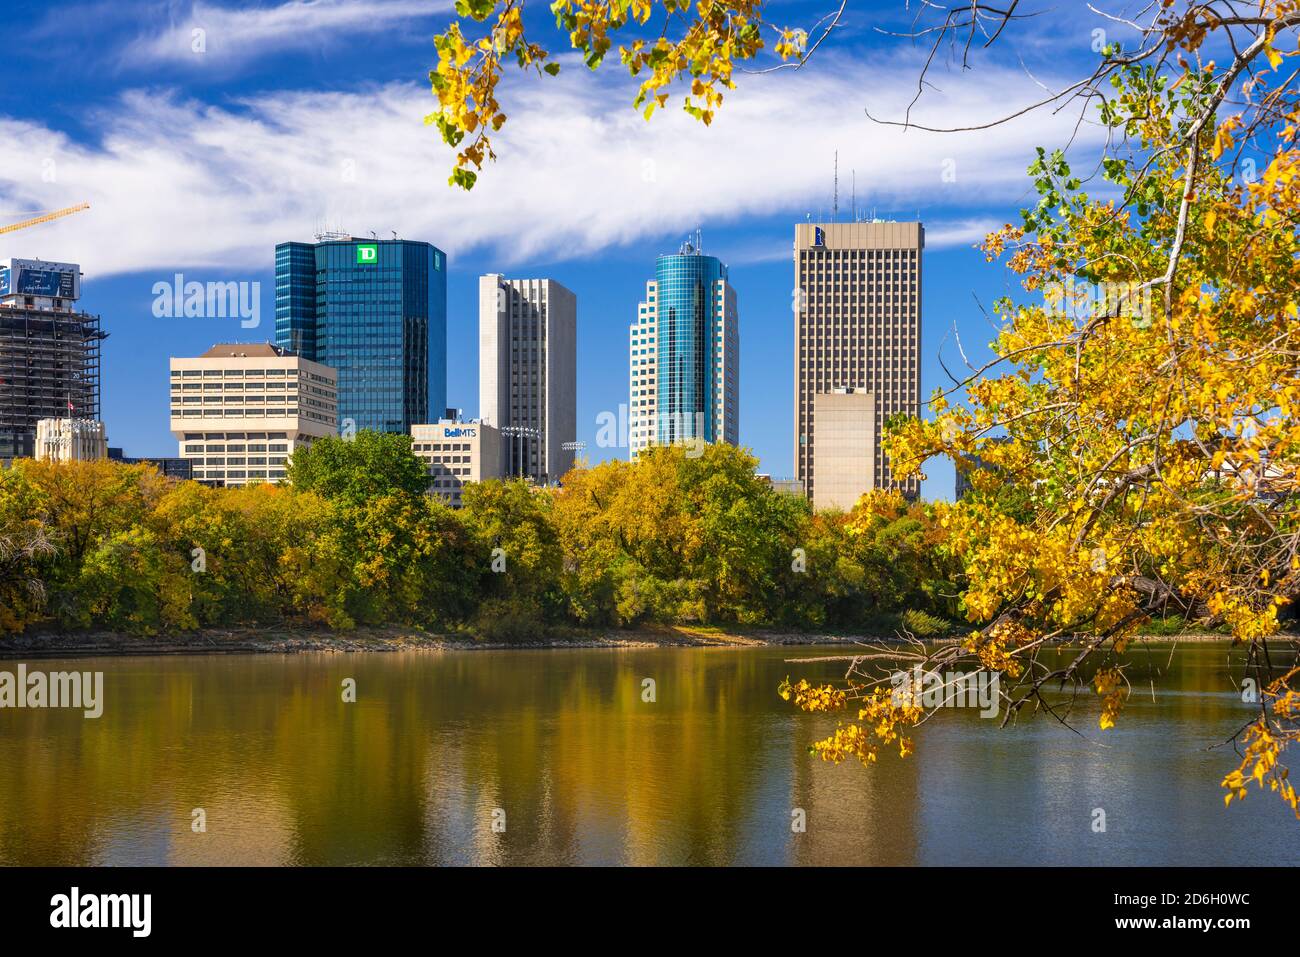 The city skyline with fall foliage color along the Red River, St. Boniface, Winnipeg, Manitoba, Canada. Stock Photo